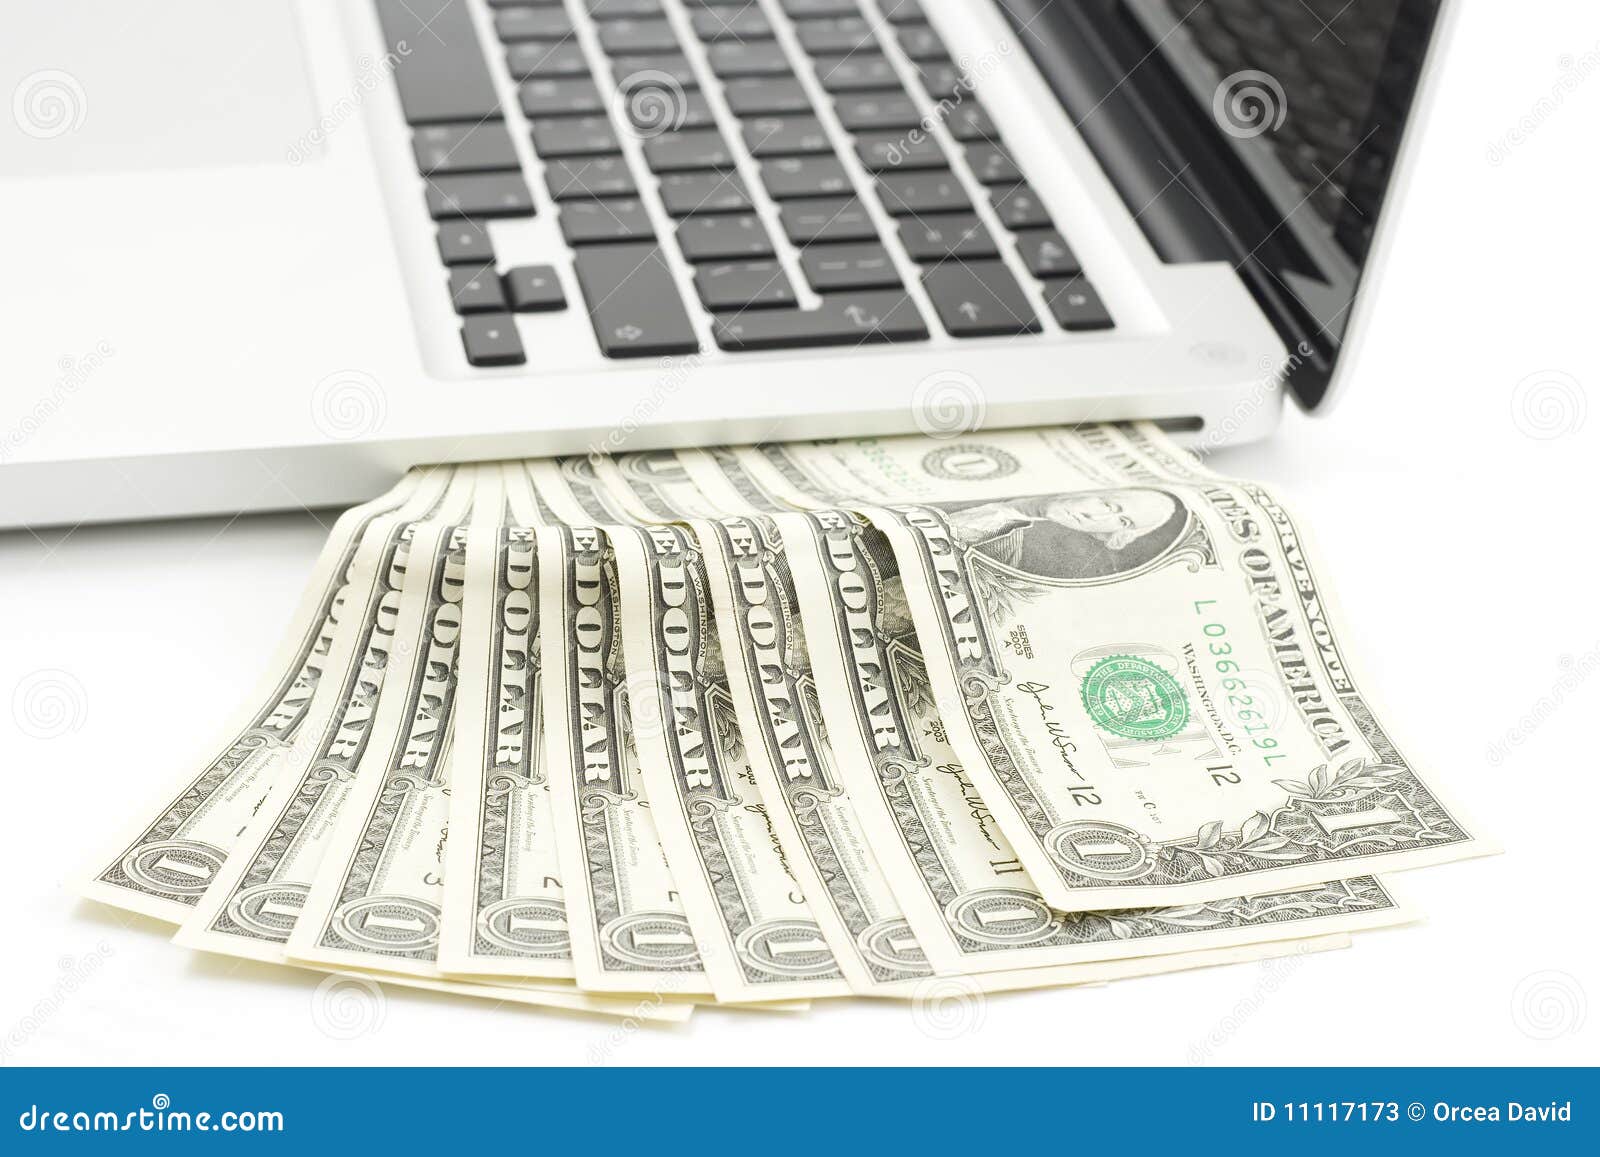 Laptop cash stock image. Image of concepts, isolated - 11117173